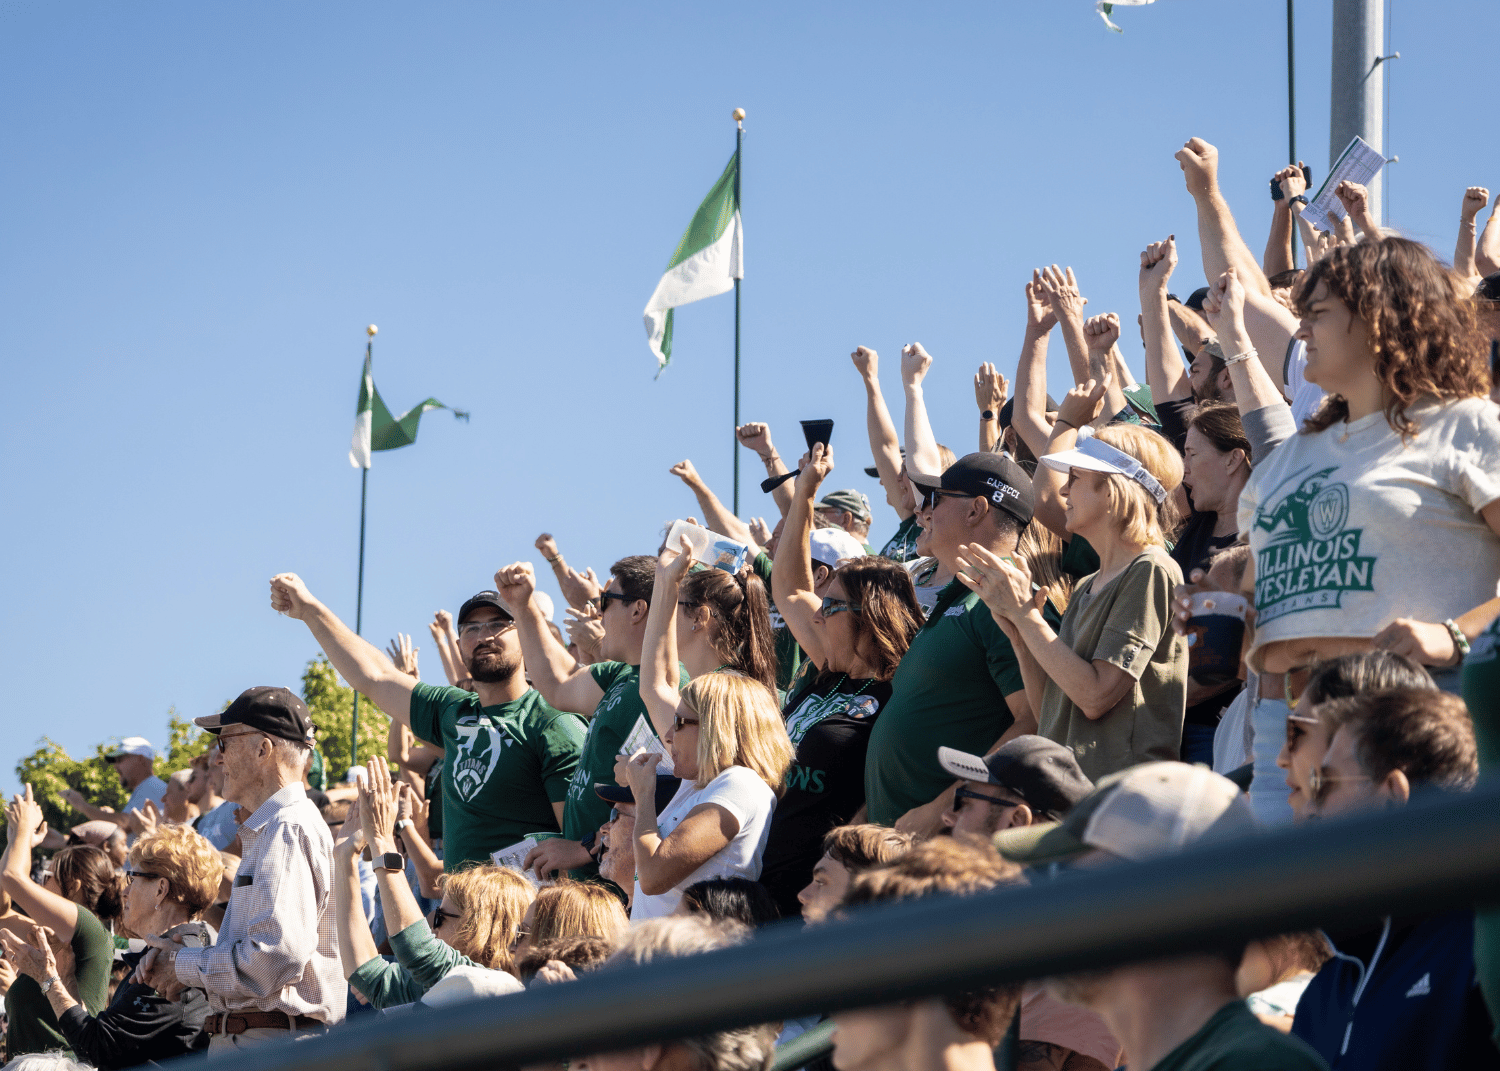 Illinois Wesleyan University fans cheer from the stands of Tucci Stadium during the 2022 homecoming football game